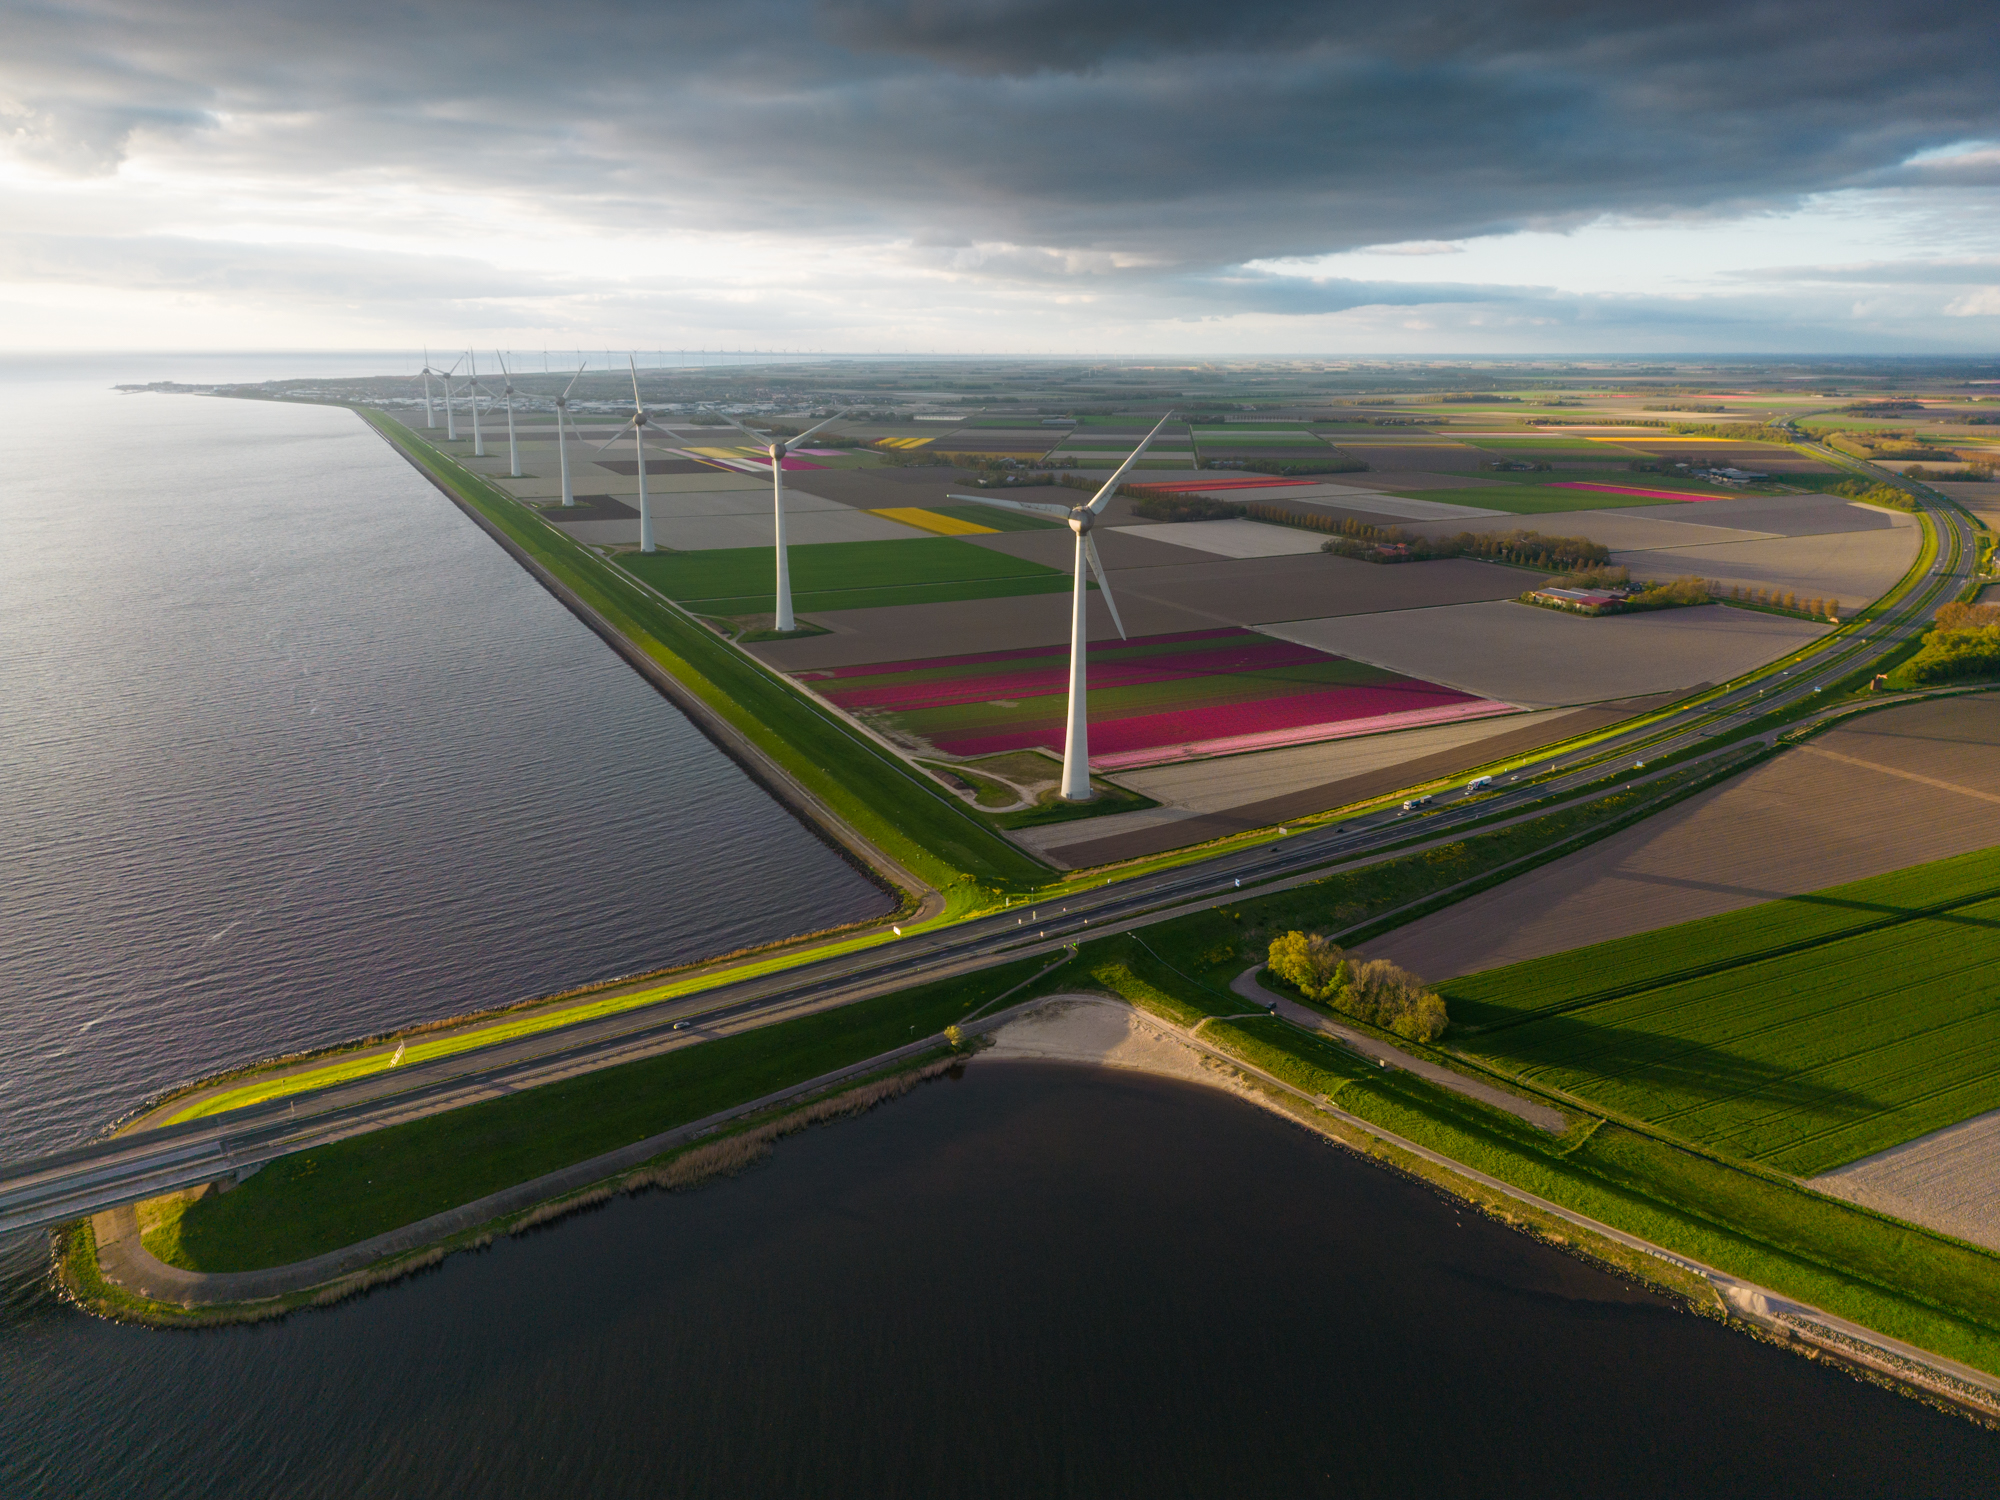 The Flevoland Provence in The Netherlands wasn't there many years ago. The Dutch made it in the water themselves; that's why it looks like this!